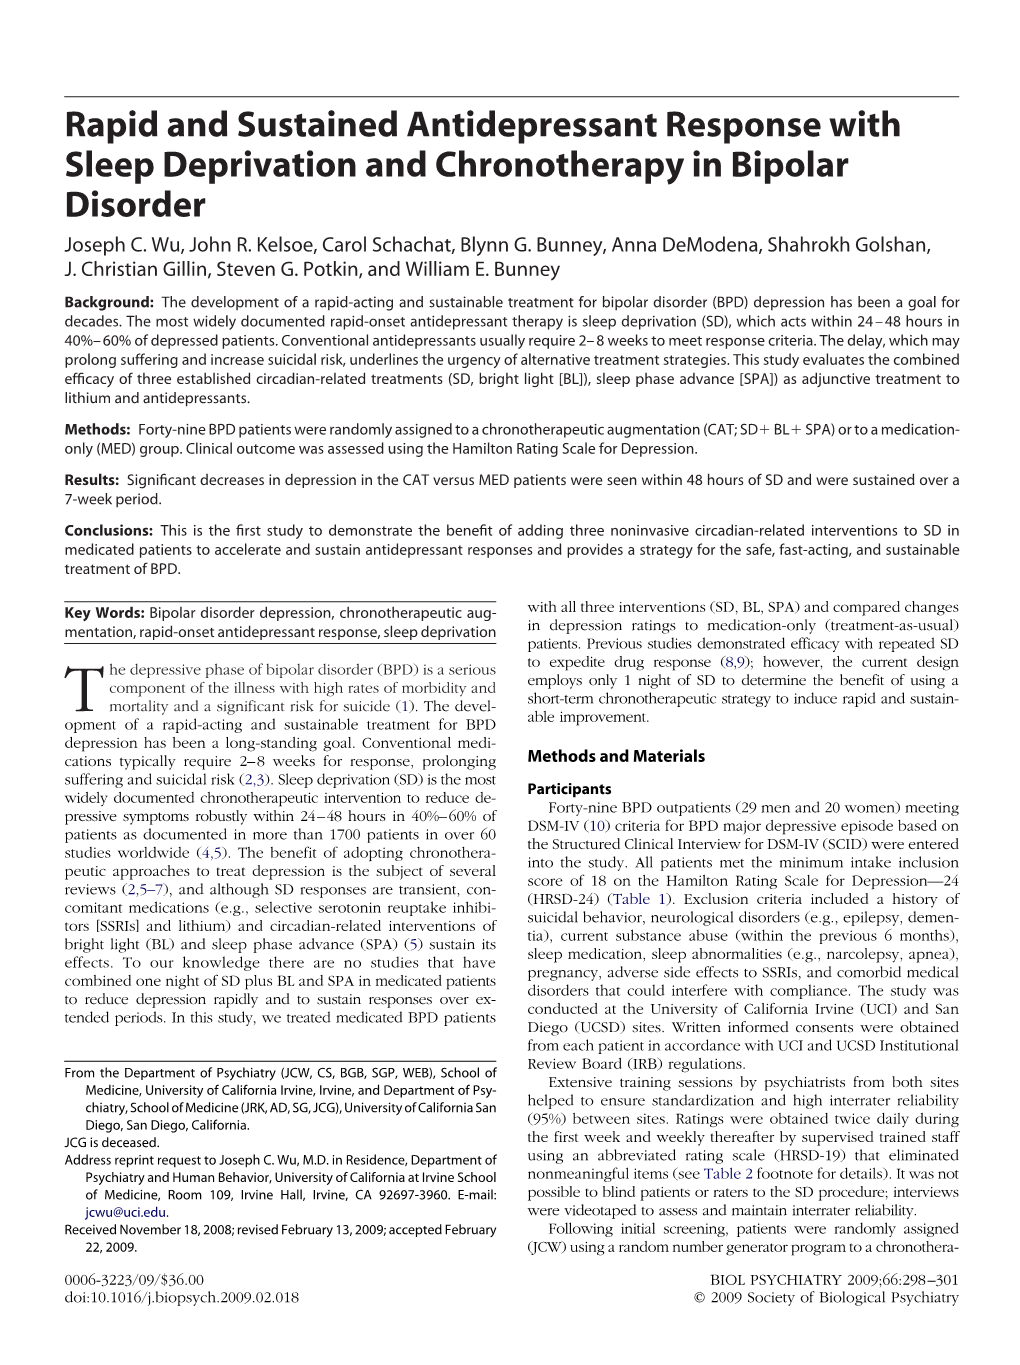 Rapid and Sustained Antidepressant Response with Sleep Deprivation and Chronotherapy in Bipolar Disorder Joseph C